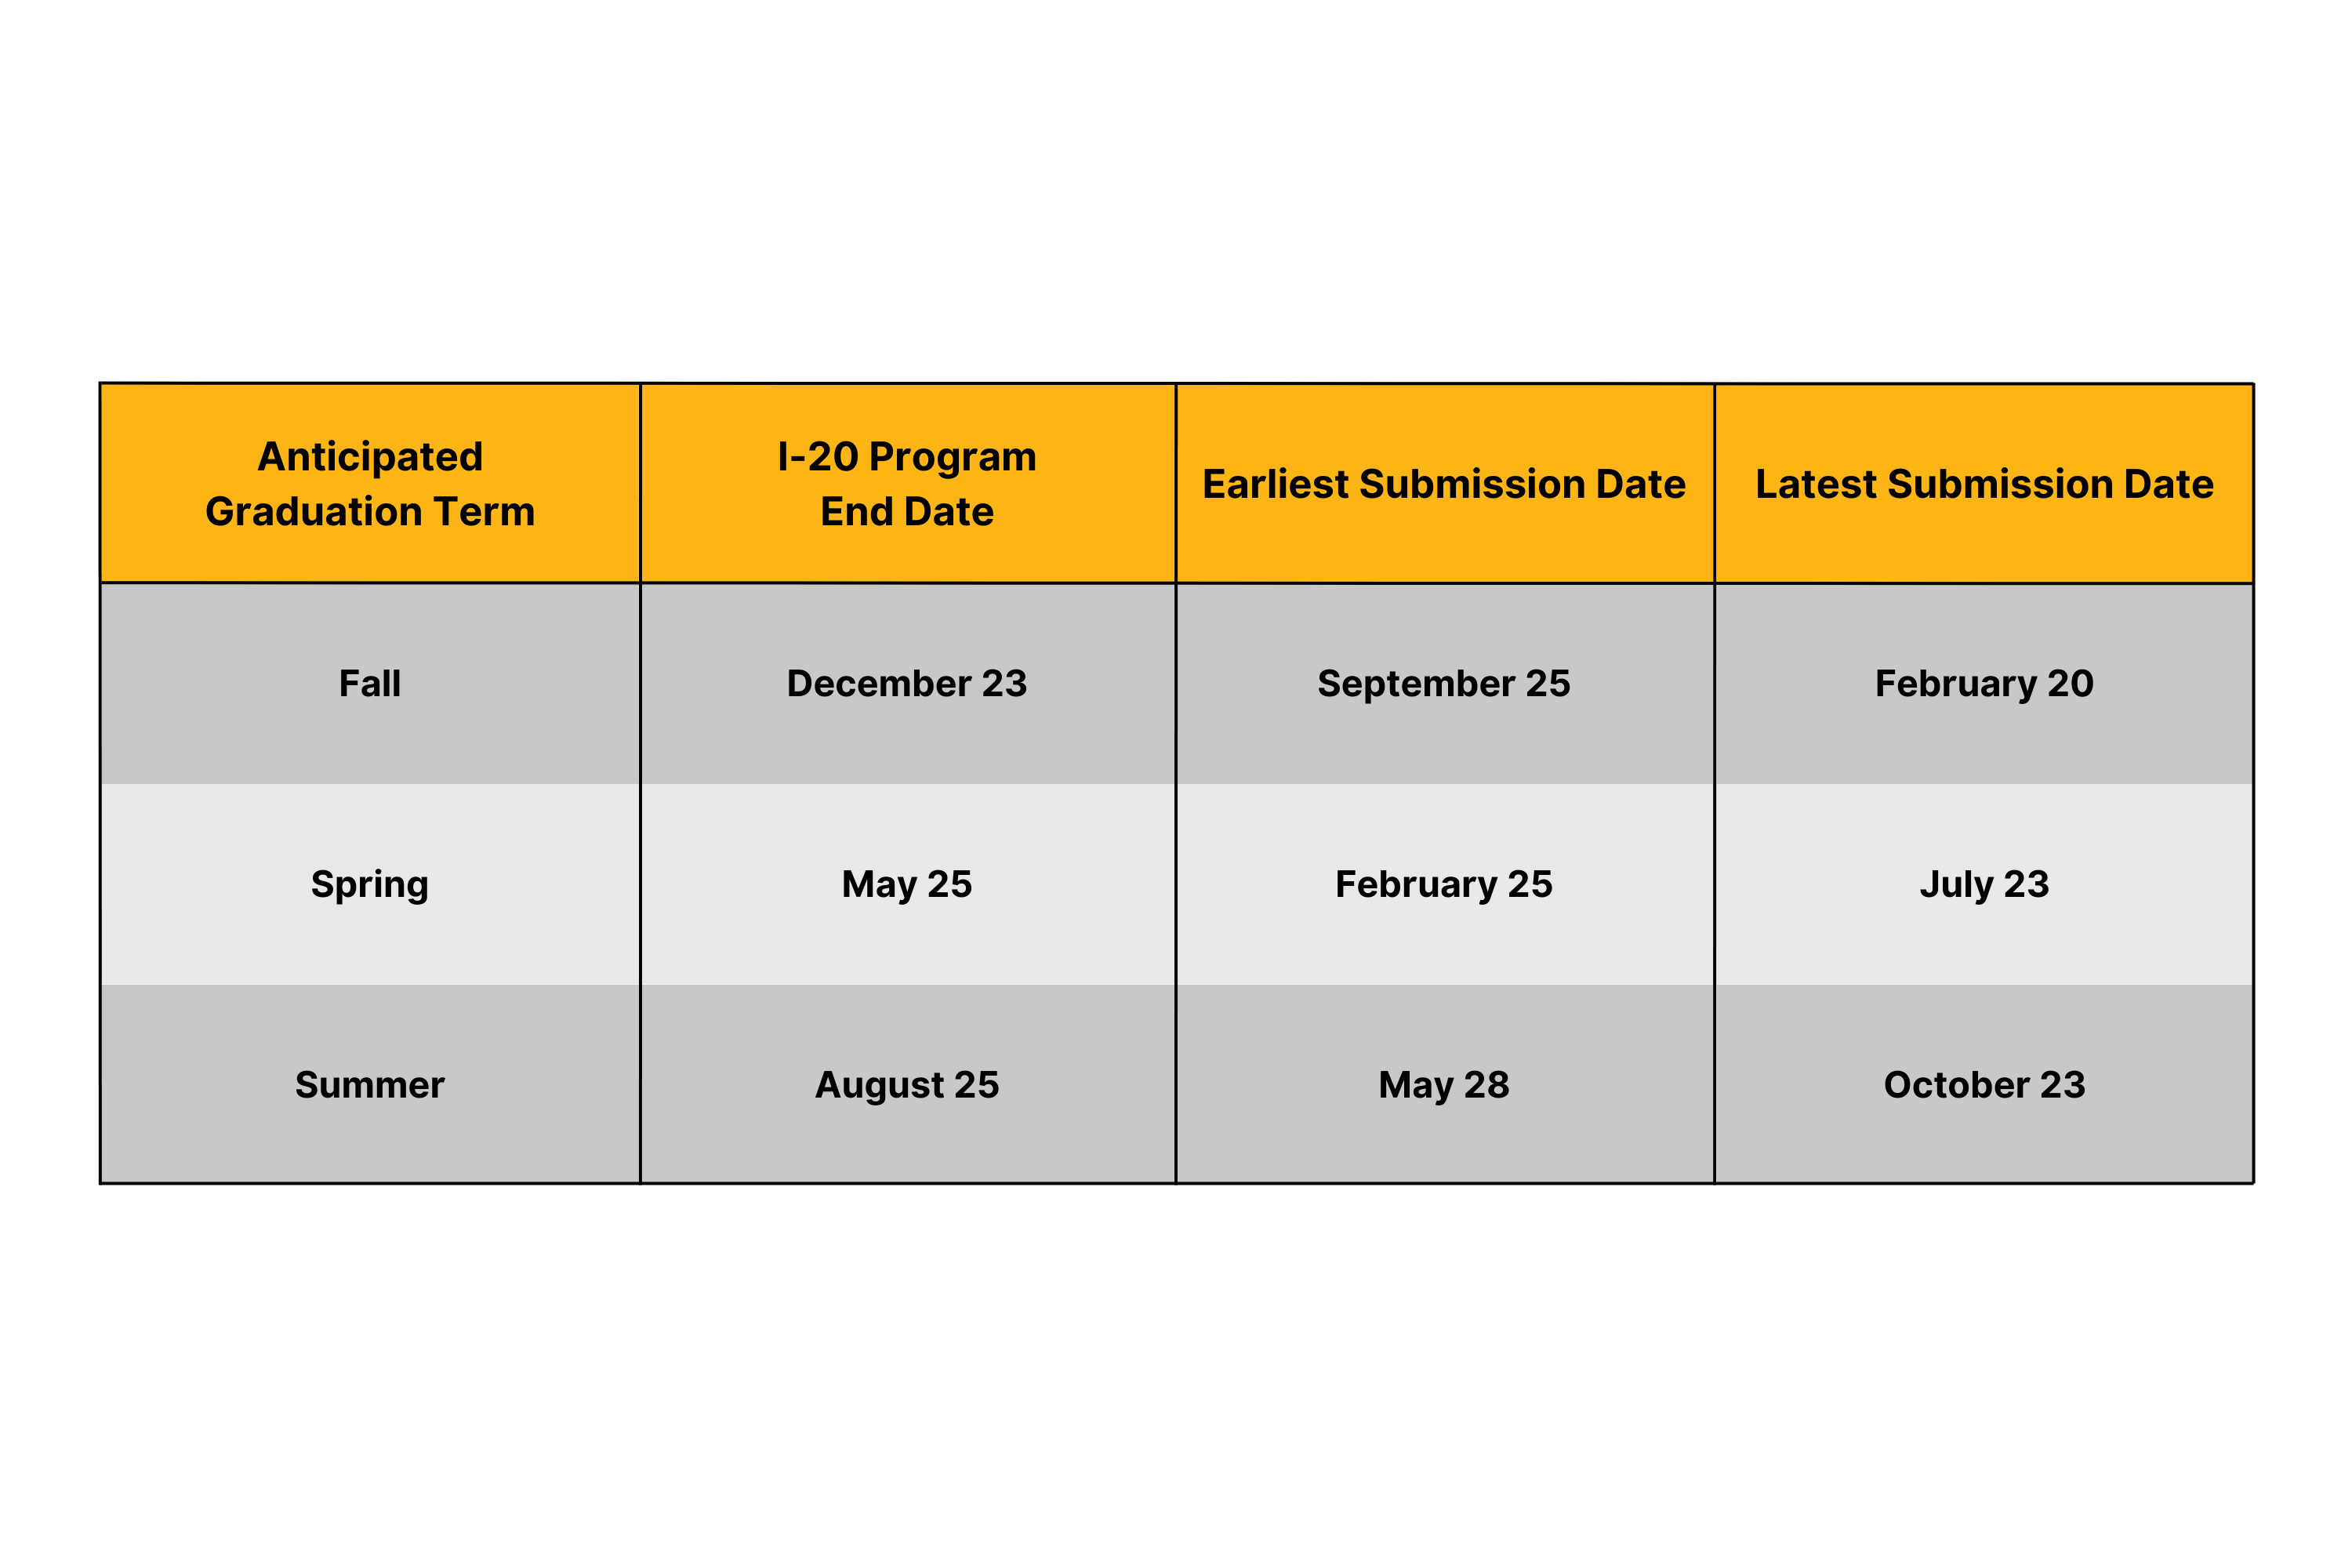 OPT submission dates